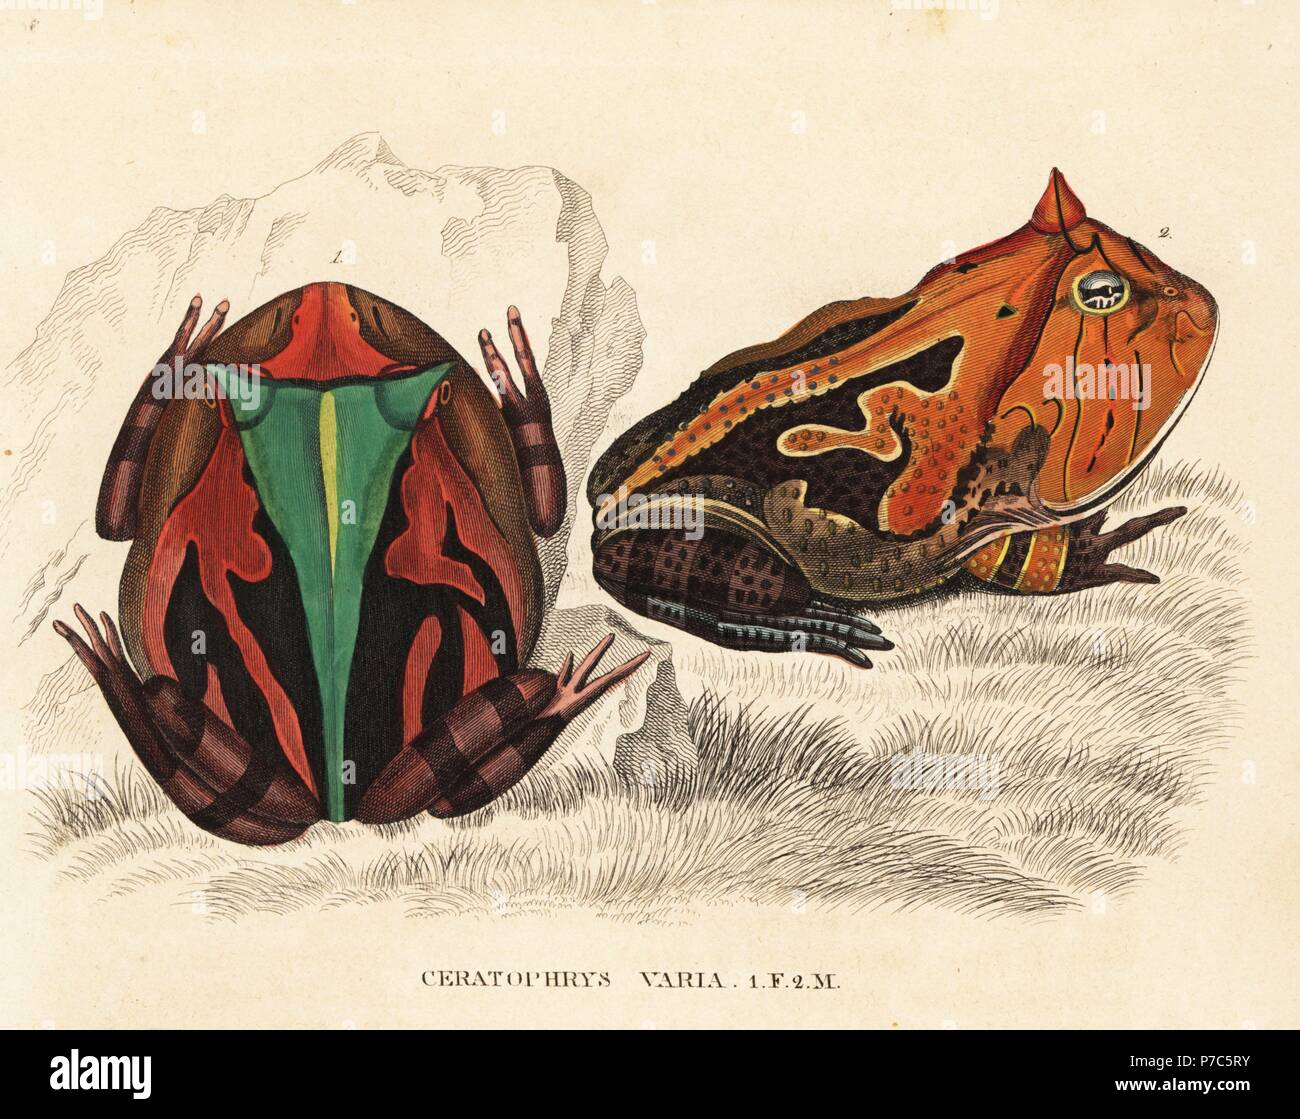 Brazilian horned frog, Ceratophrys aurita, male and female (Ceratophrys varia). Handcoloured lithograph from Georg Friedrich Treitschke's Gallery of Natural History, Naturhistorischer Bildersaal des Thierreiches, Liepzig, 1840. Stock Photo